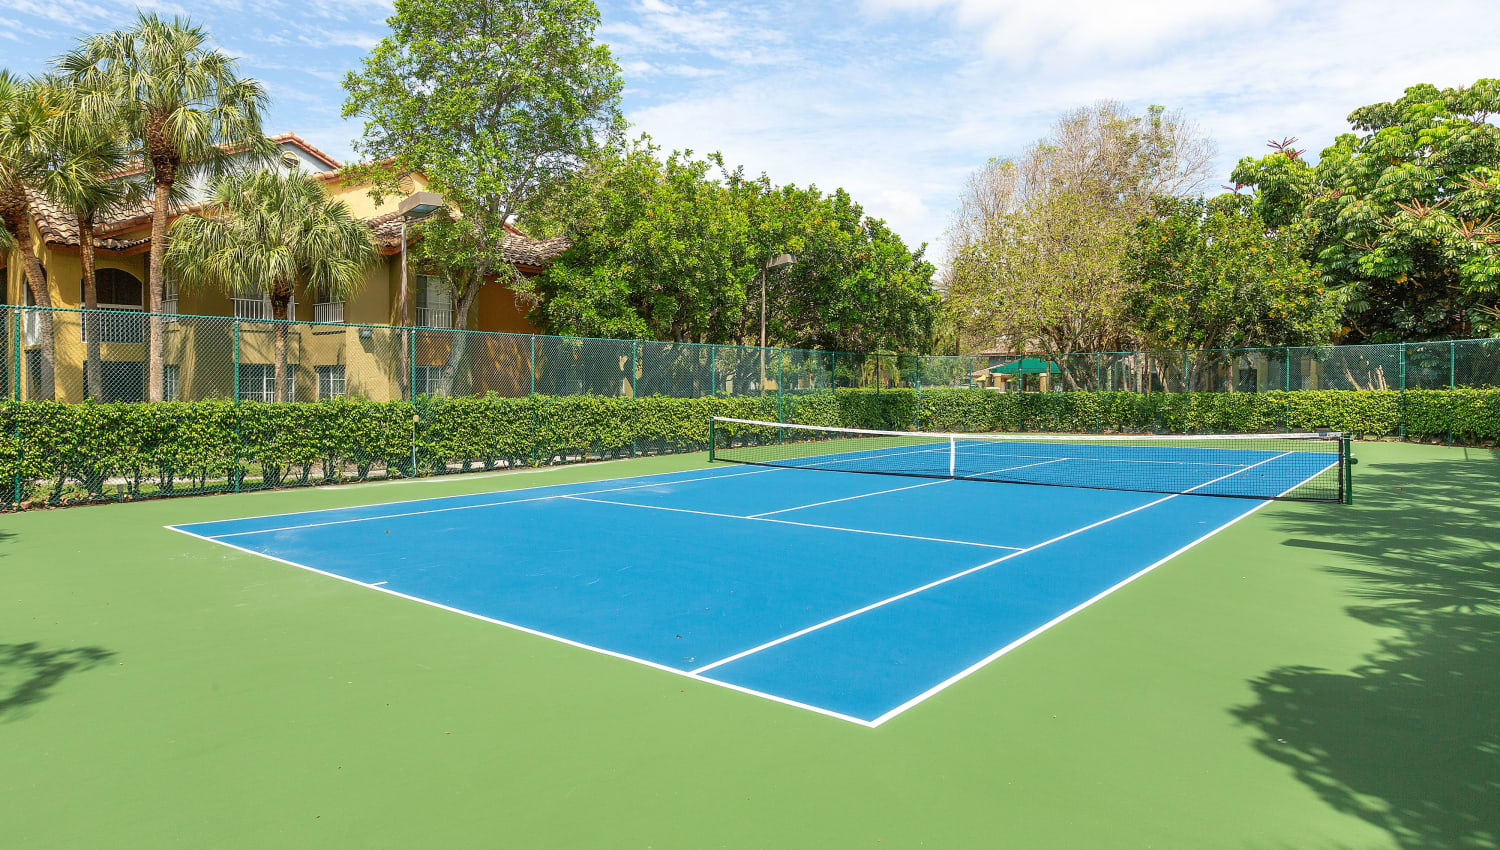 Tennis court at Mosaic Apartments in Coral Springs, Florida